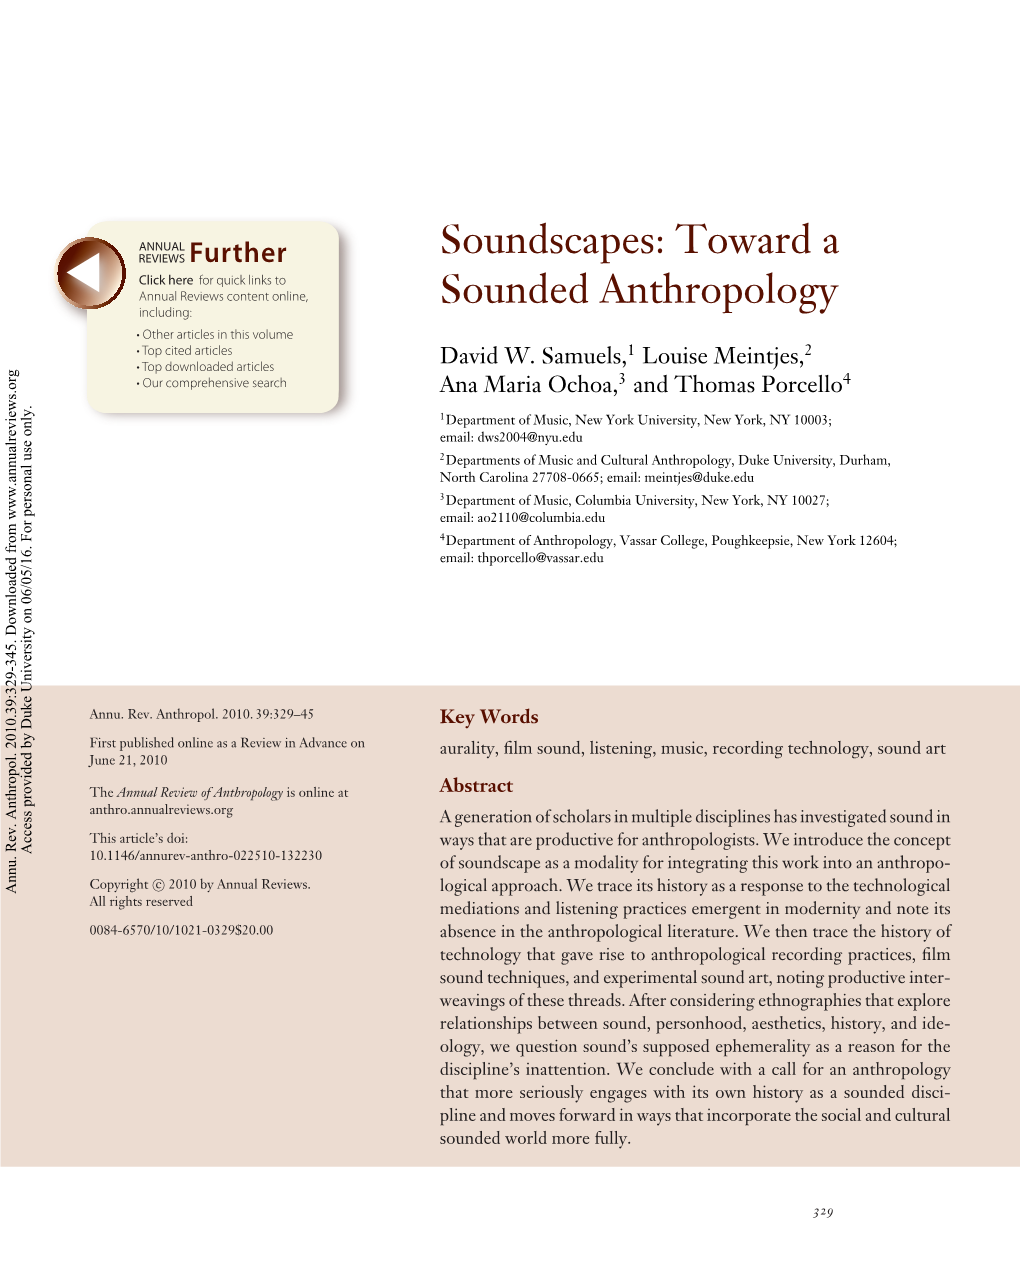 Soundscapes: Toward a Sounded Anthropology